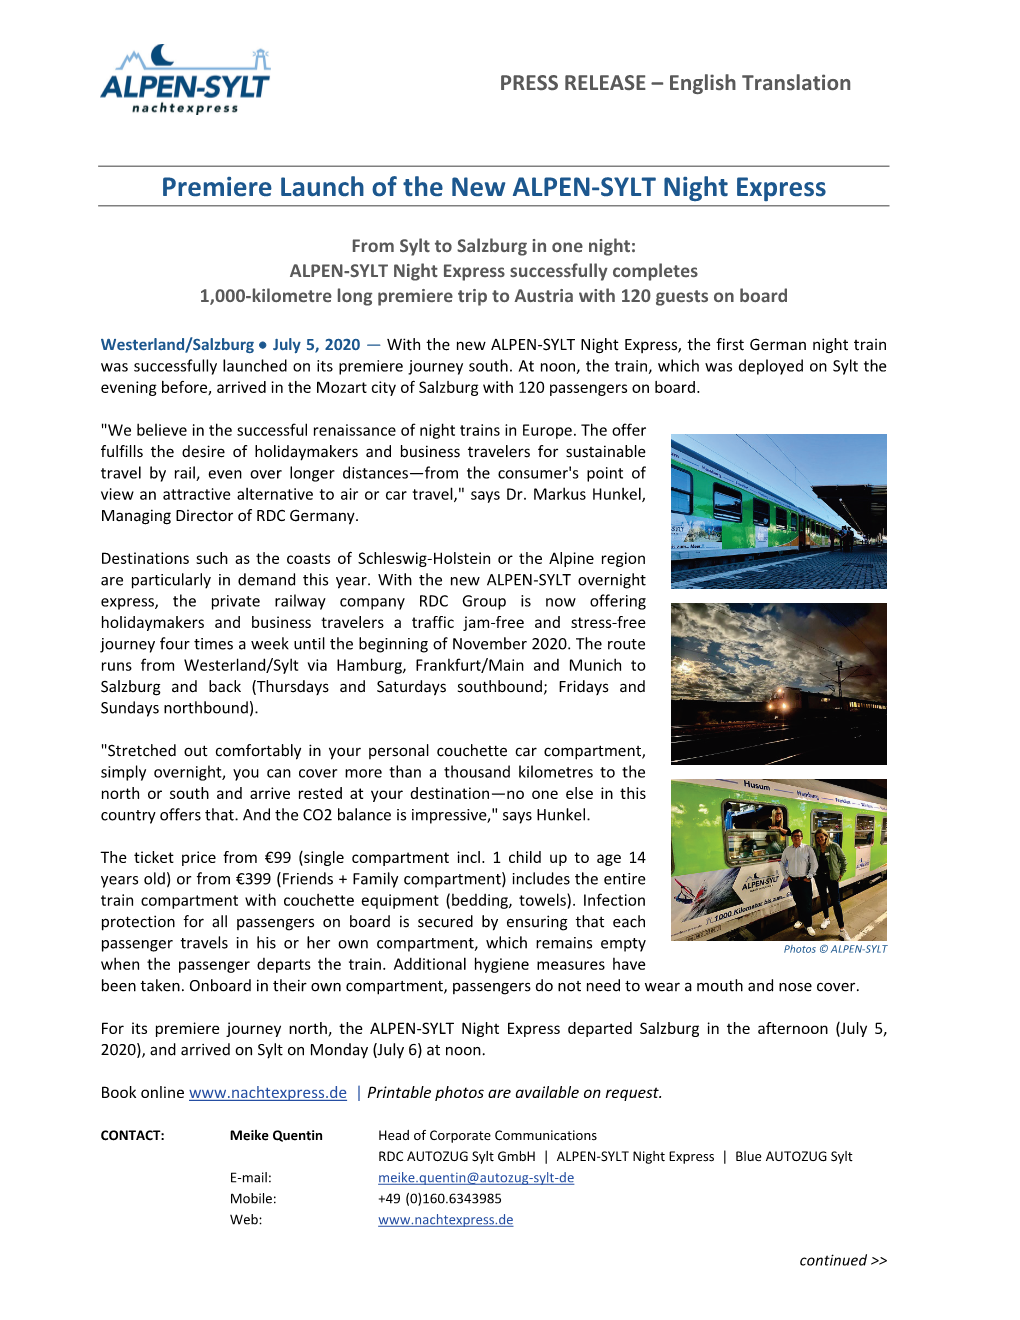 Premiere Launch of the New ALPEN-SYLT Night Express